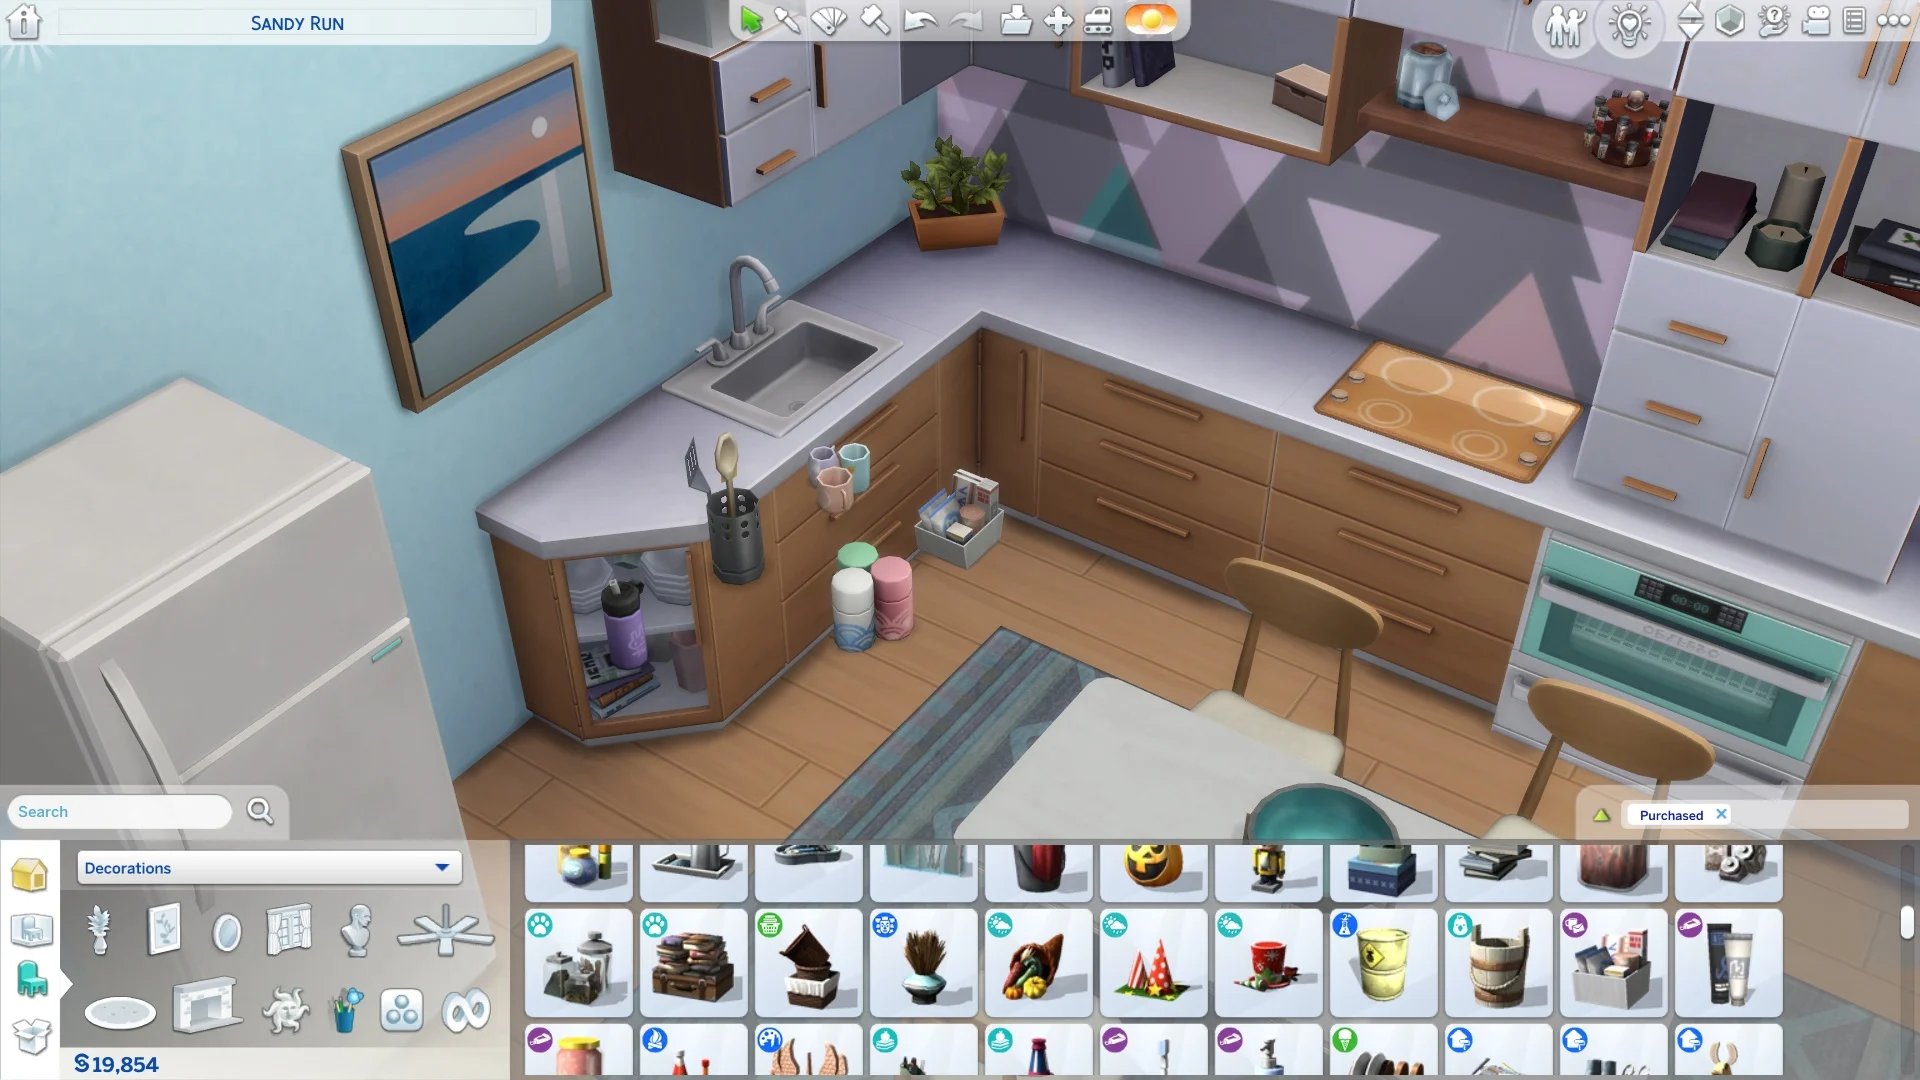 How To Use The Move Objects Cheat In Sims 4